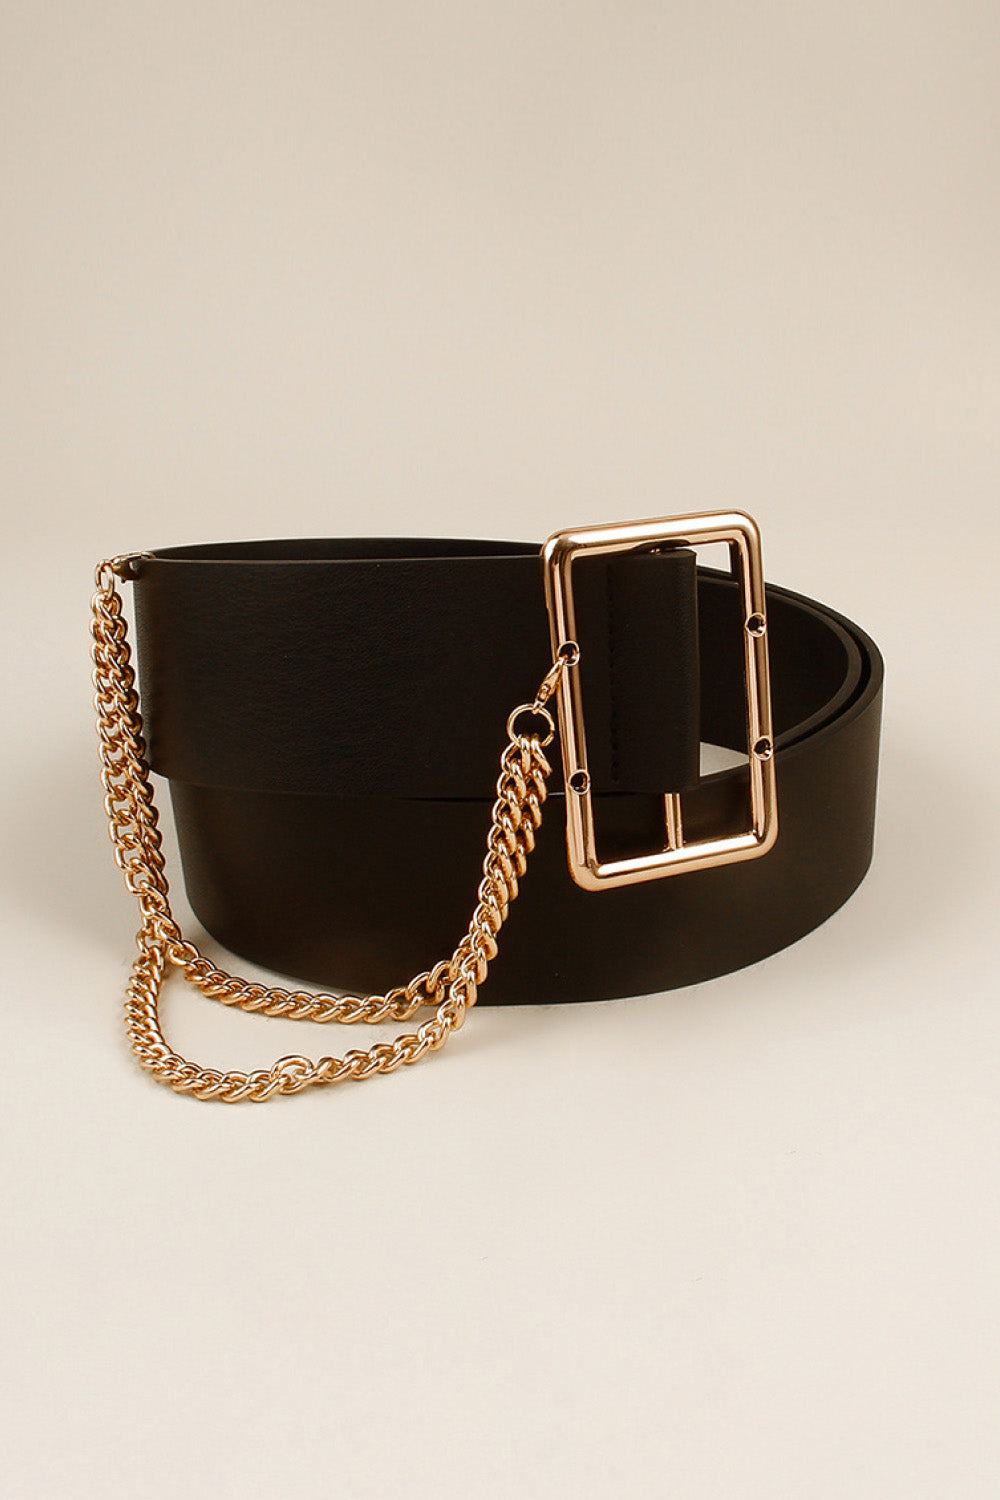 Punk City PU Leather Wide Belt with Chain - BP